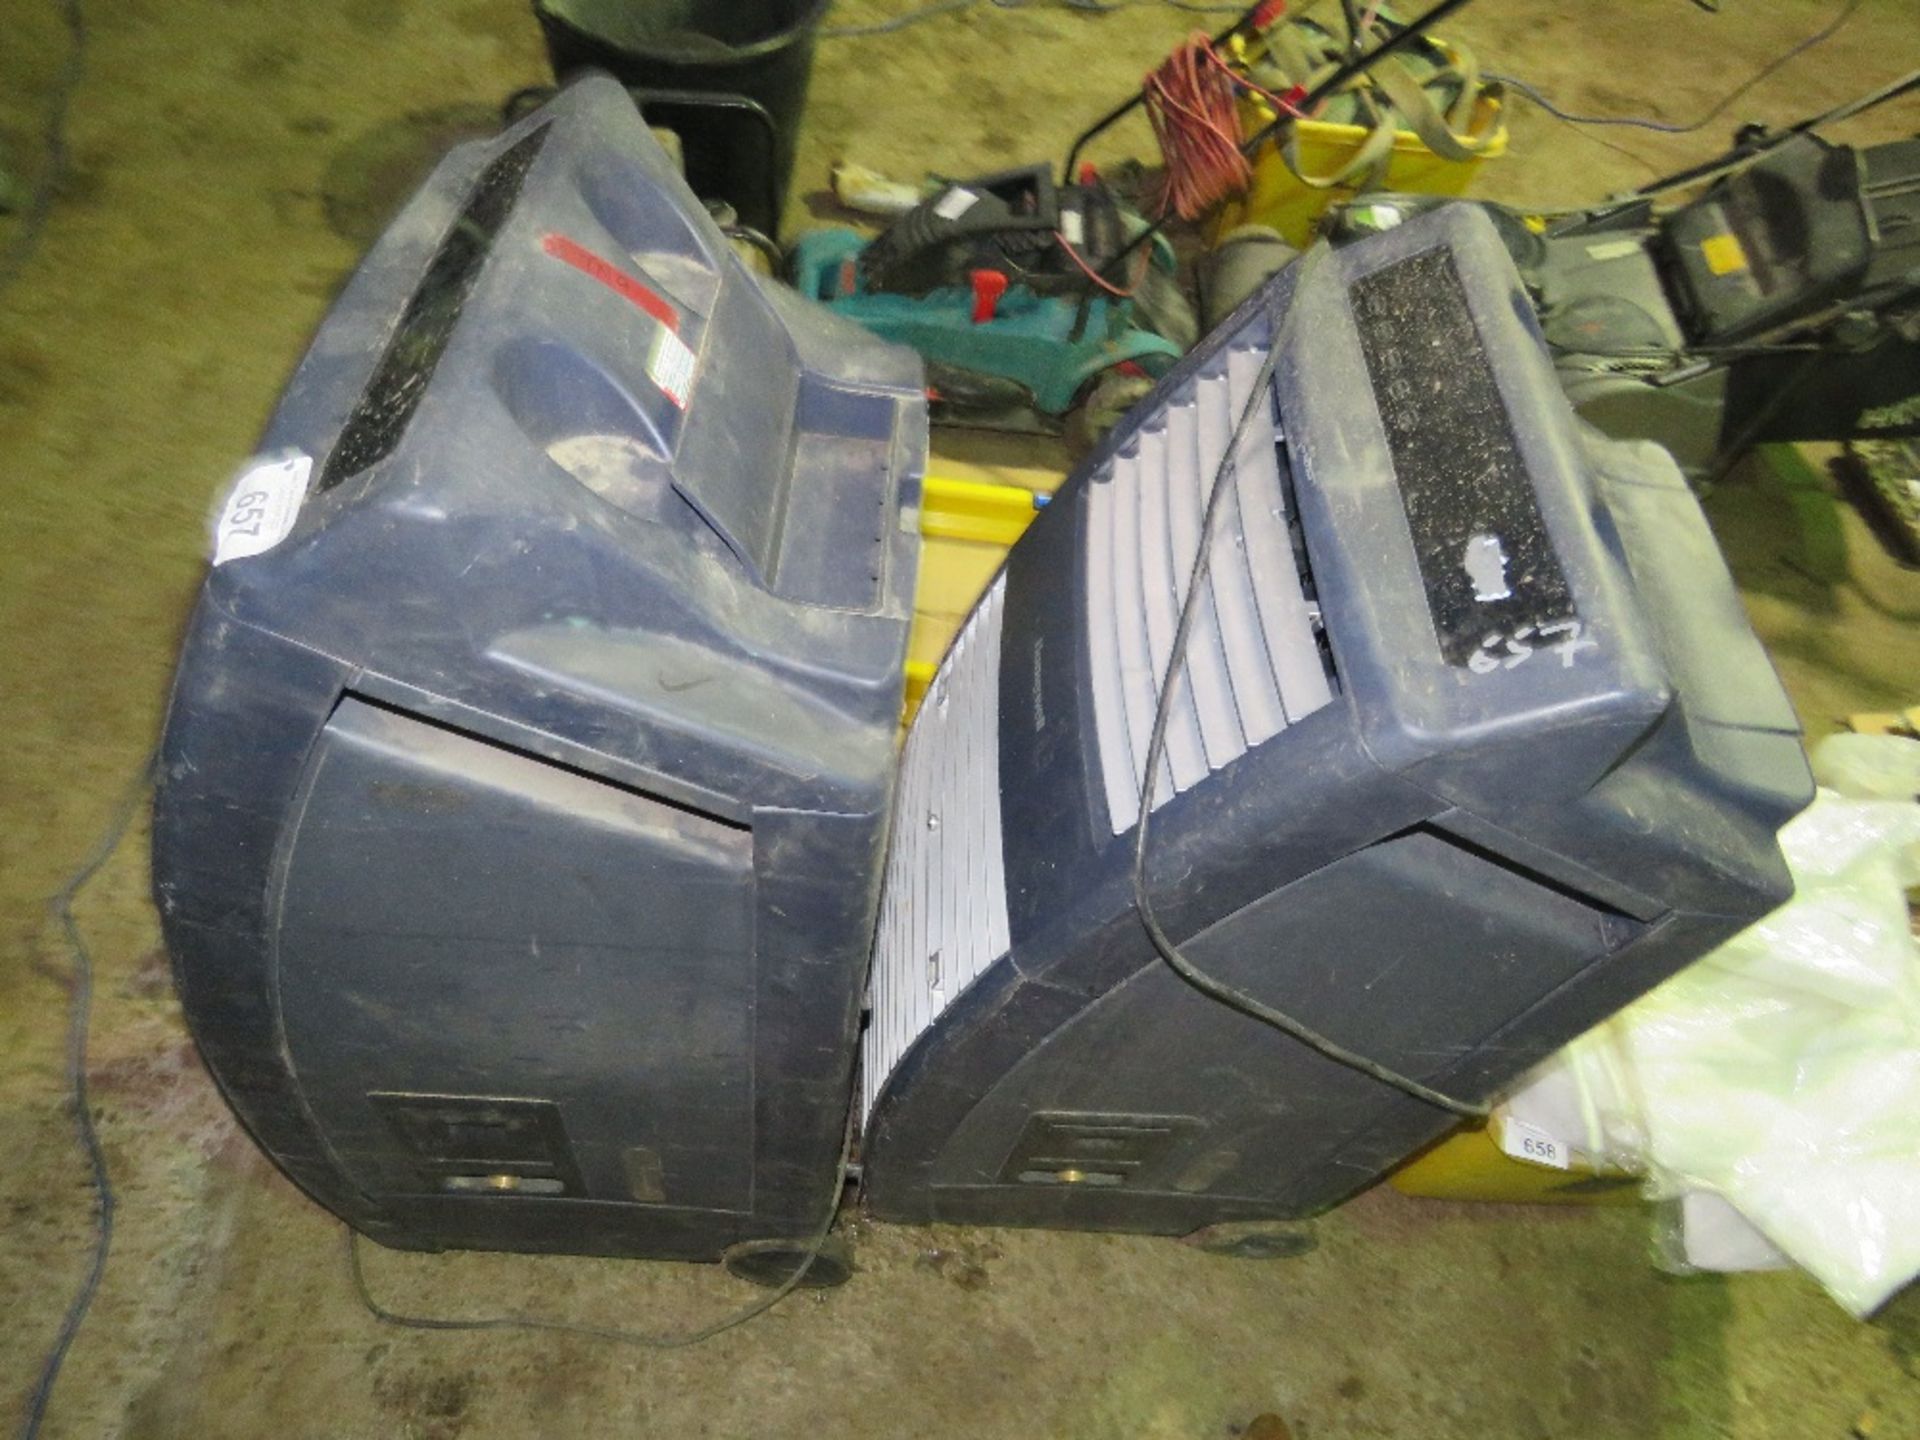 2 X HONEYWELL AIR CONDITIONERS/COOLERS. DIRECT FROM LOCAL COMPANY DUE TO DEPOT CLOSURE. - Image 2 of 5